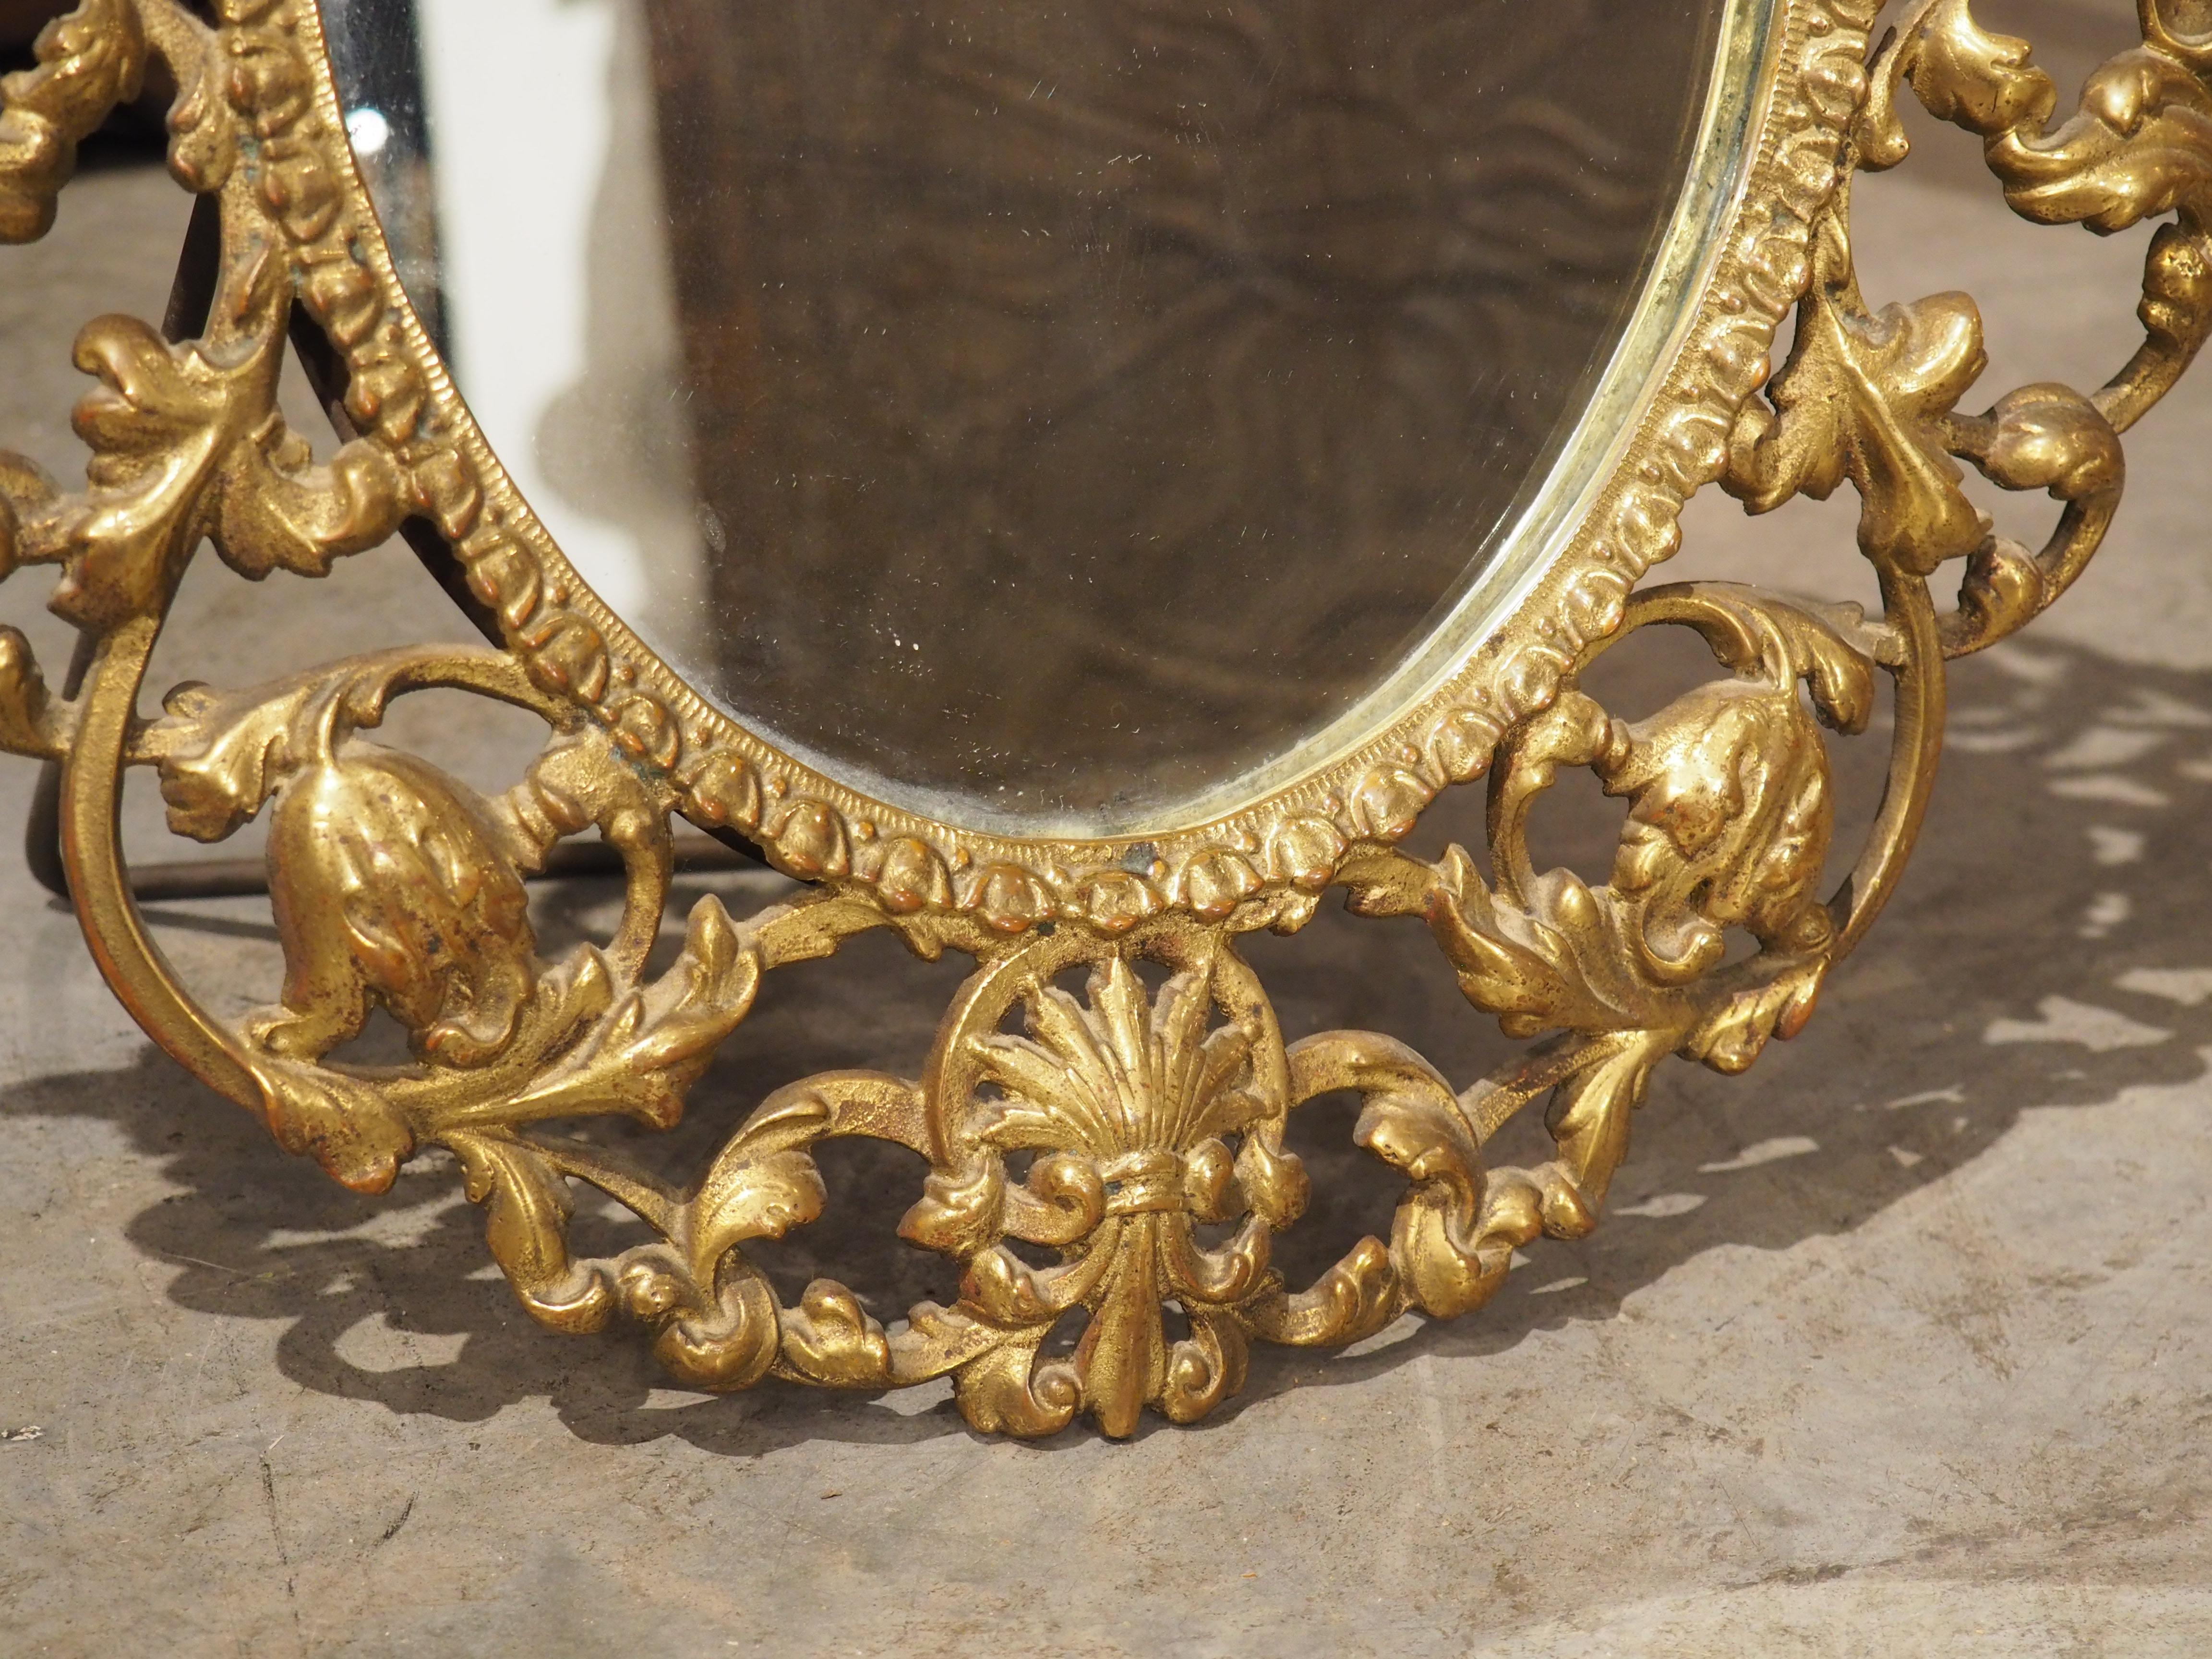 Circa 1900 Oval Gilt Bronze Table Mirror from Italy For Sale 5